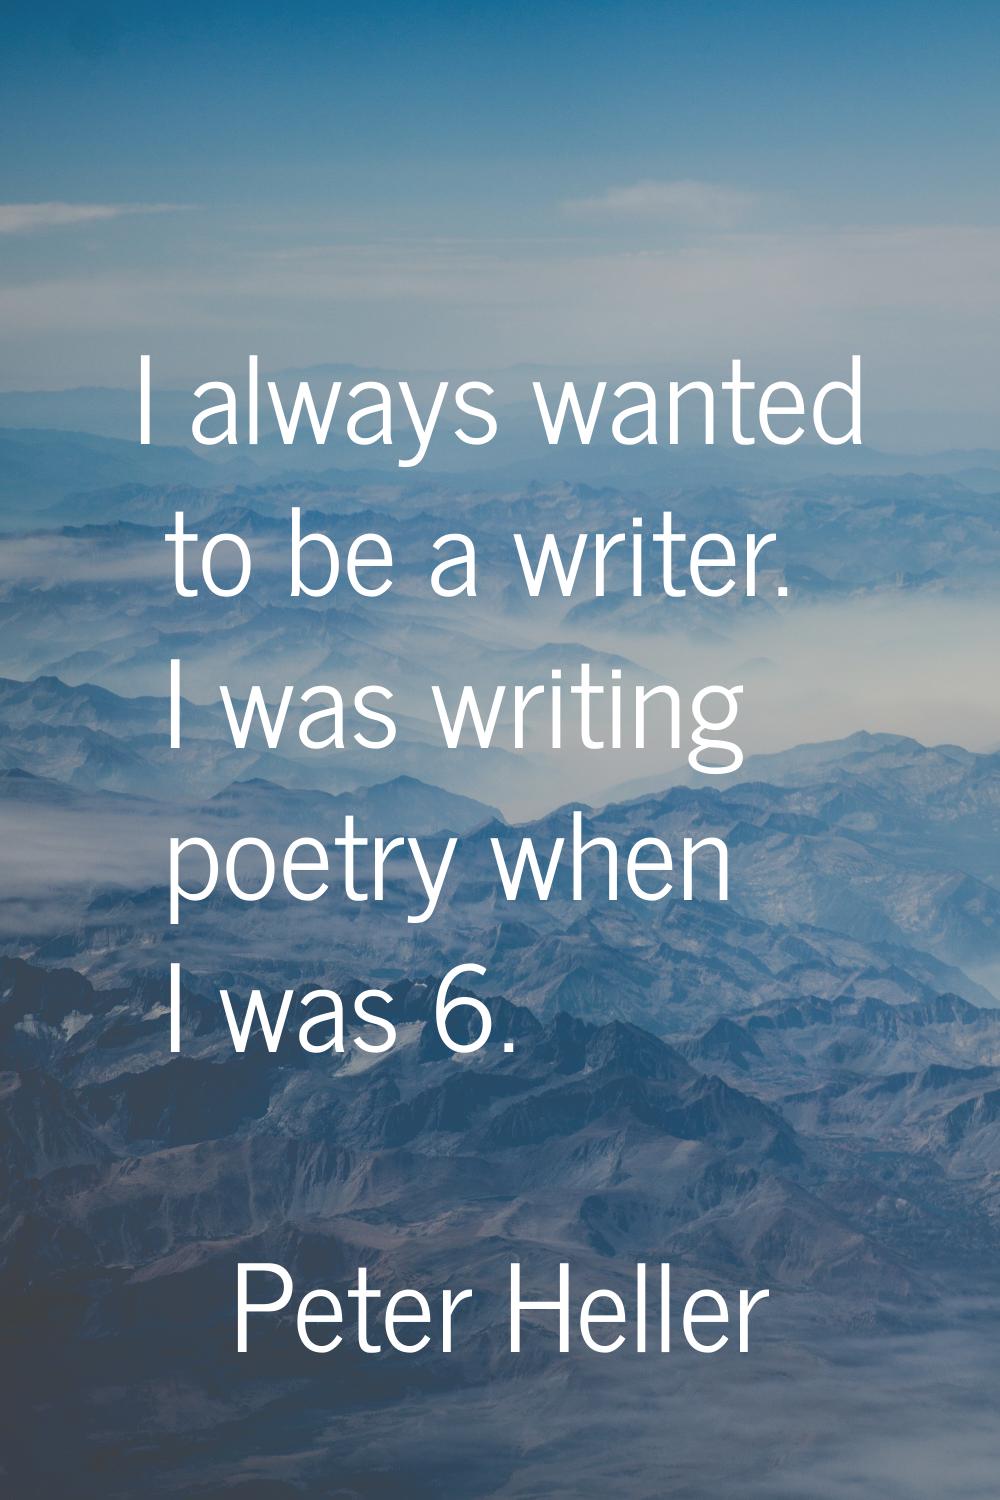 I always wanted to be a writer. I was writing poetry when I was 6.